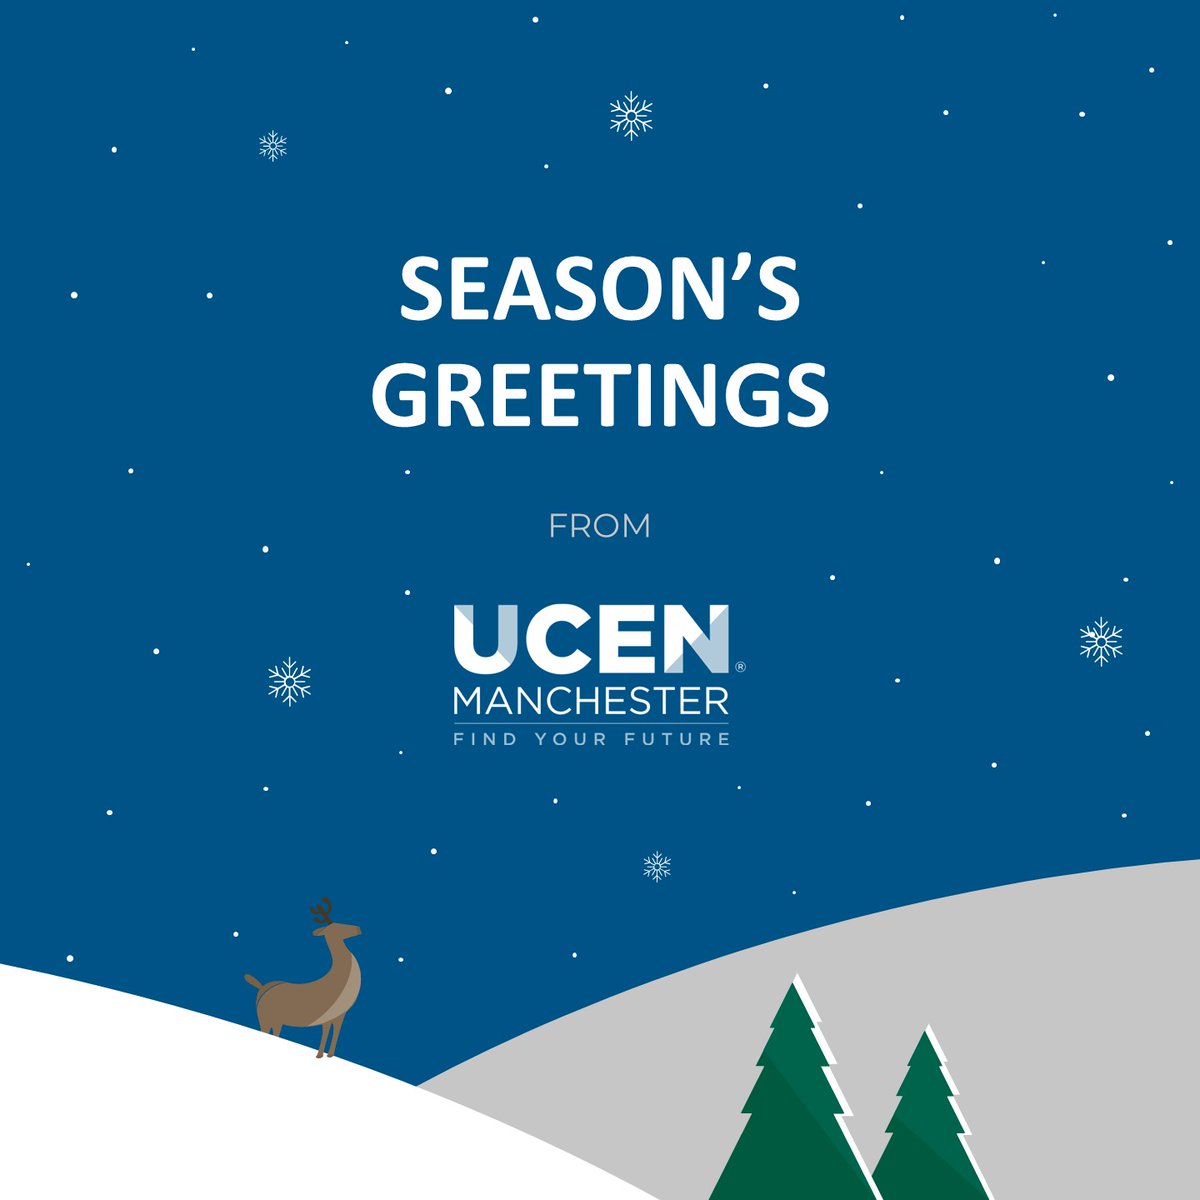 Season’s Greetings on behalf of all the staff at UCEN Manchester. We wish you a relaxing festive period.